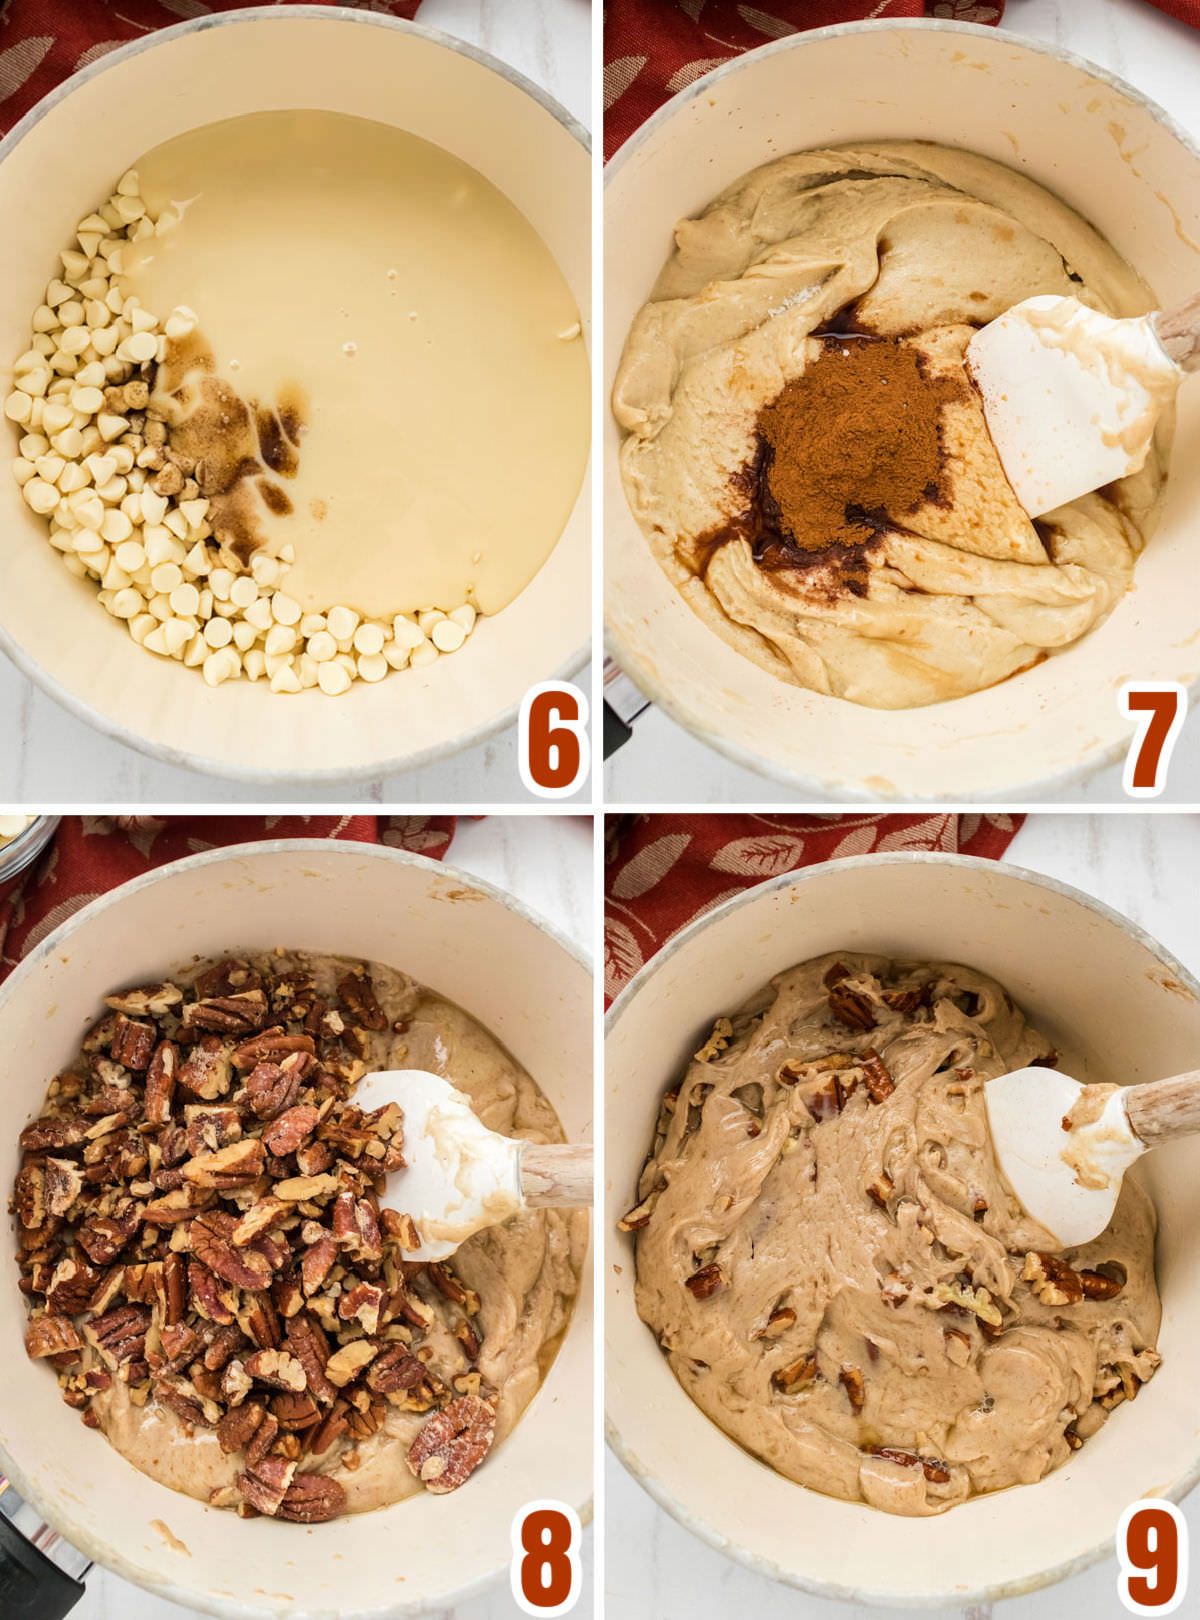 Collage image showing the steps for making the Butter Pecan Fudge.